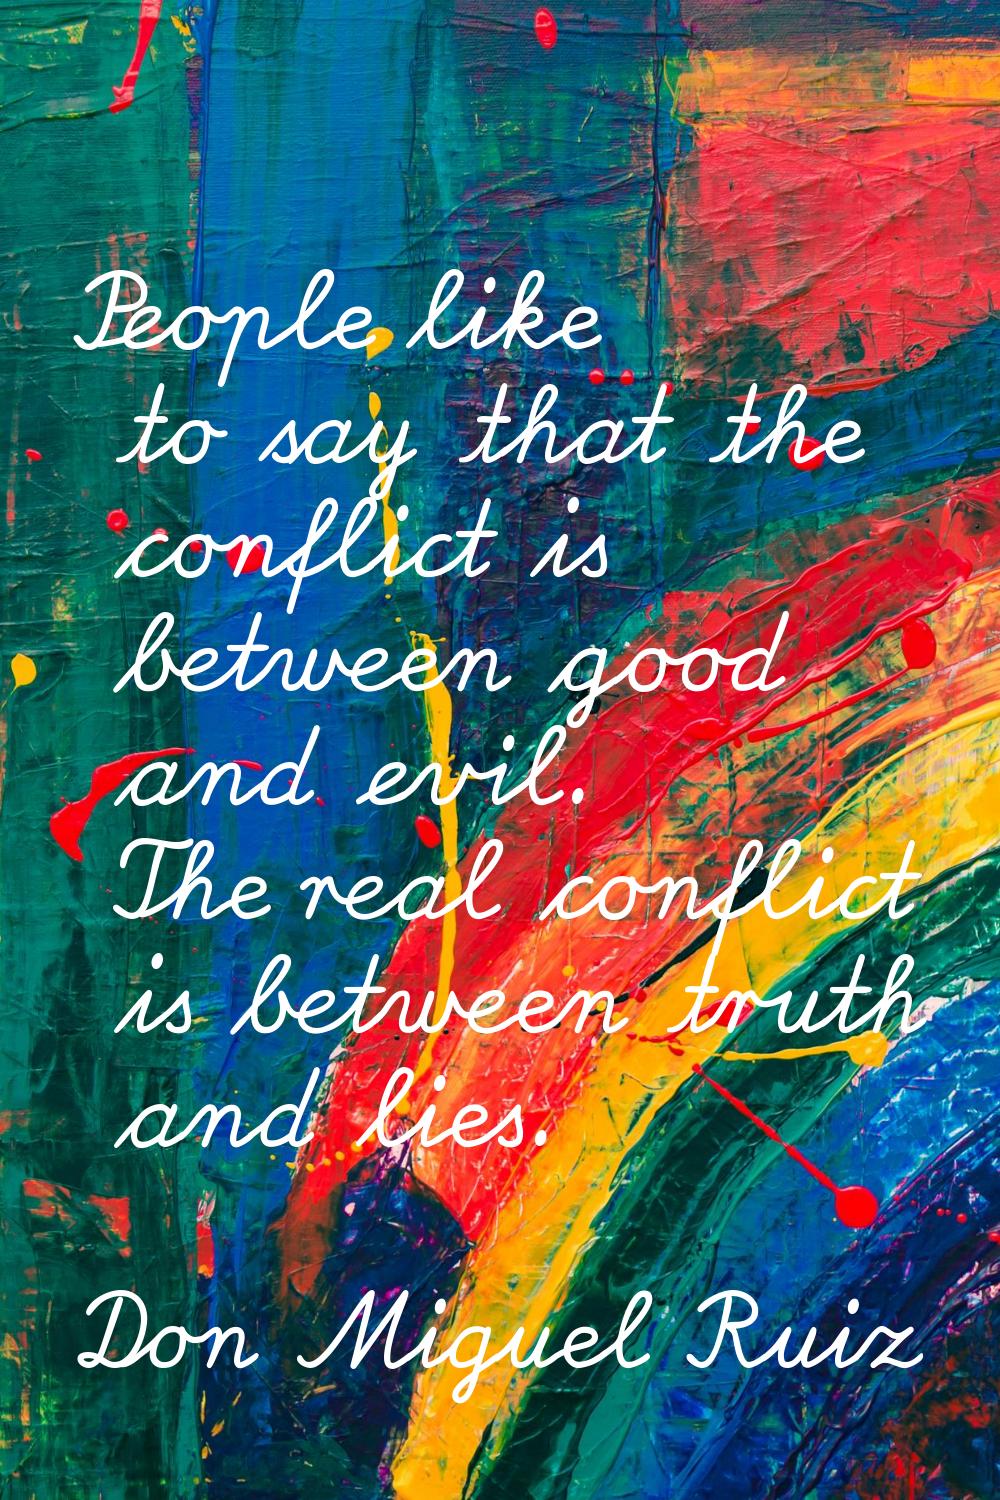 People like to say that the conflict is between good and evil. The real conflict is between truth a